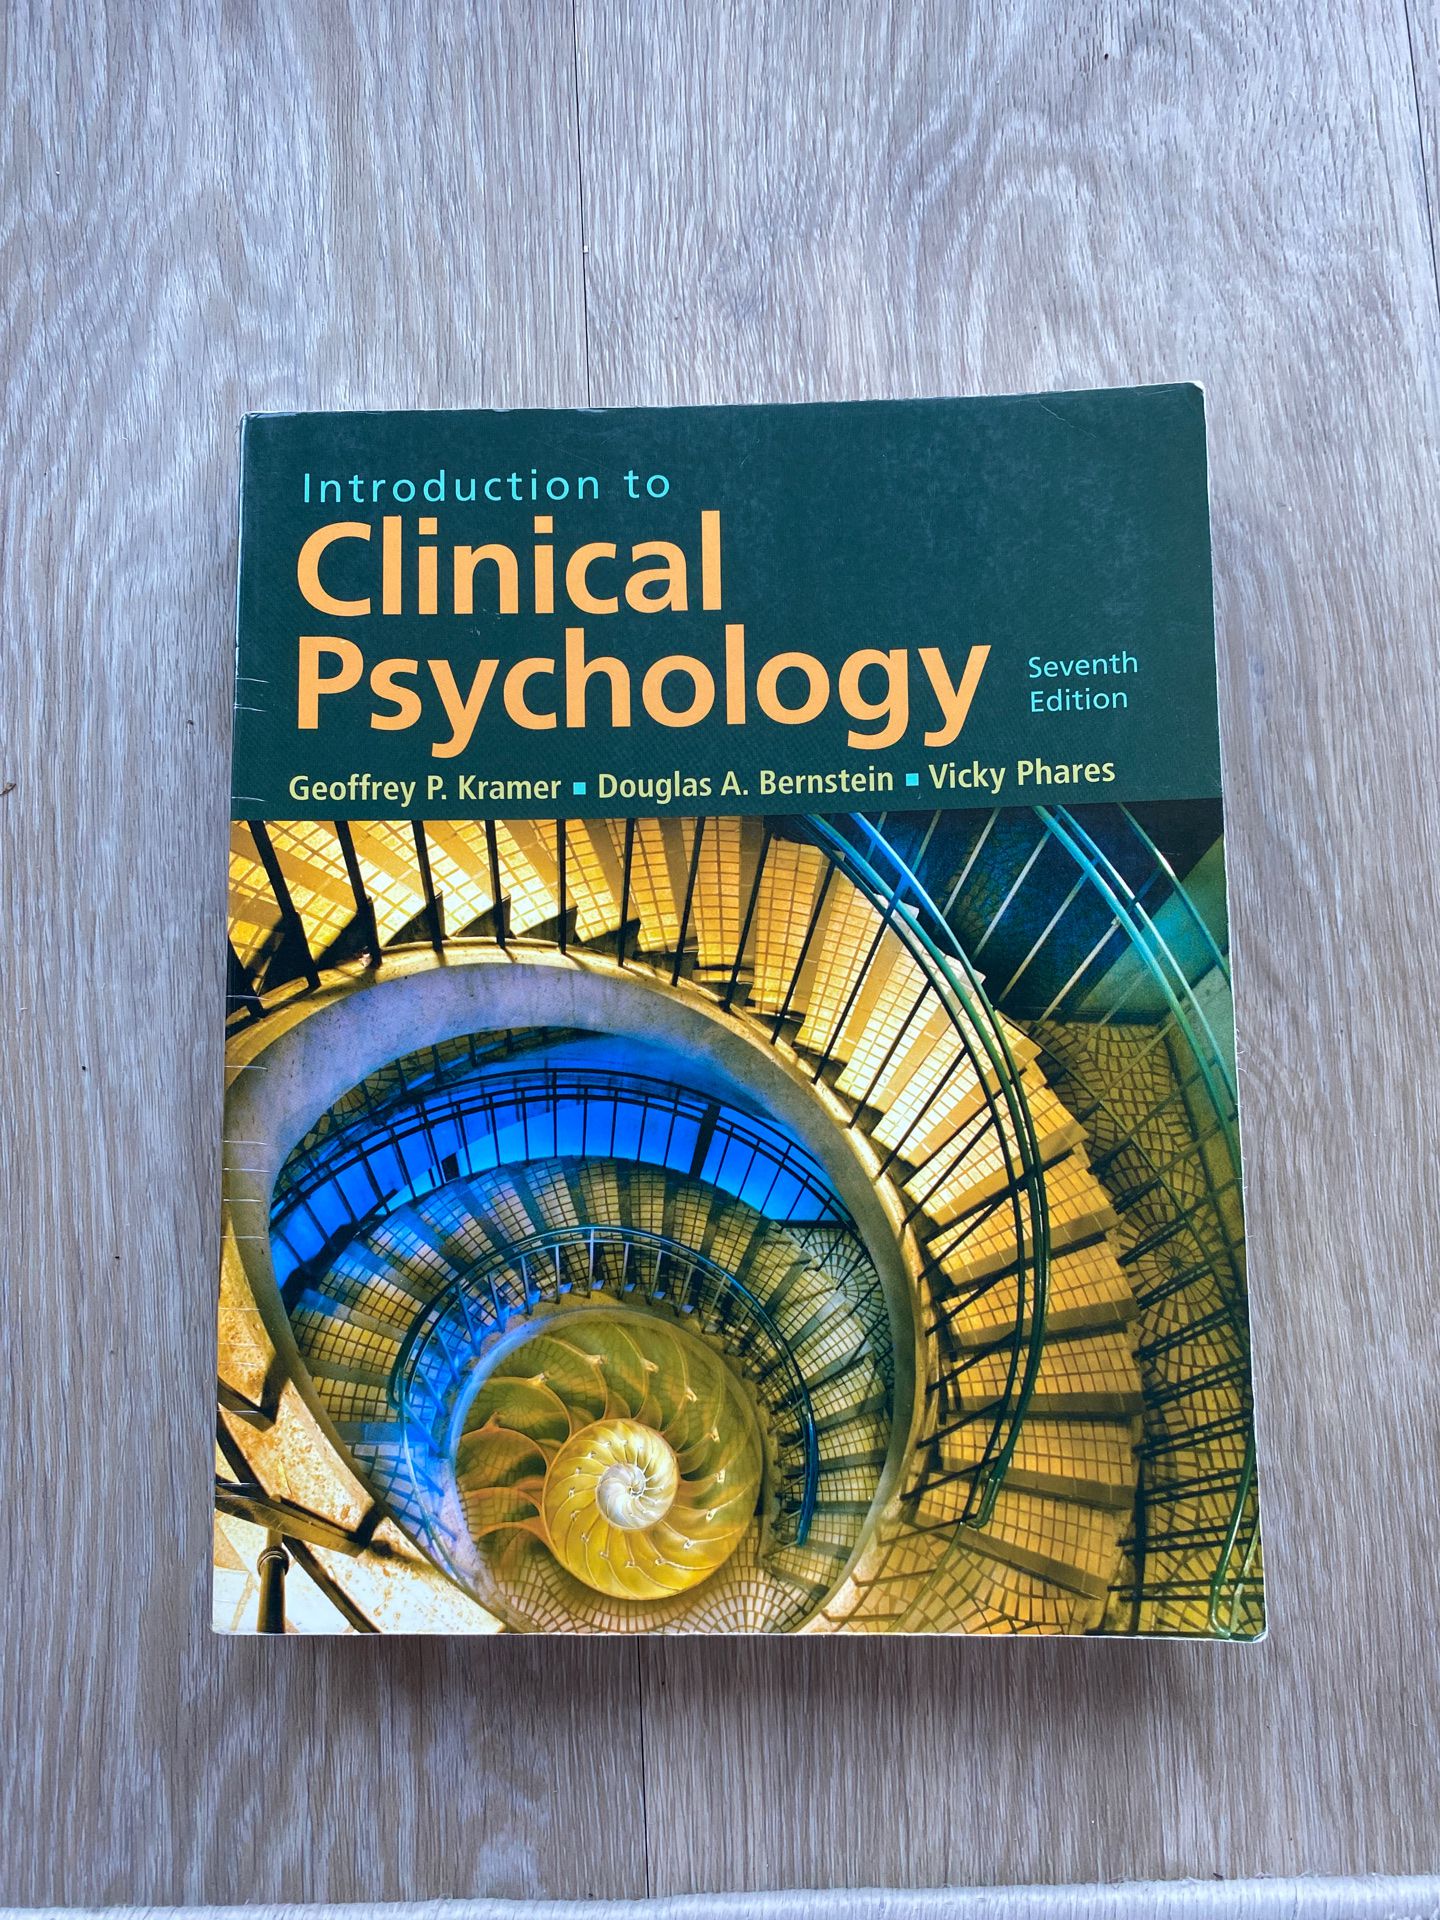 Psychology Book (introduction to Clinical Psychology)